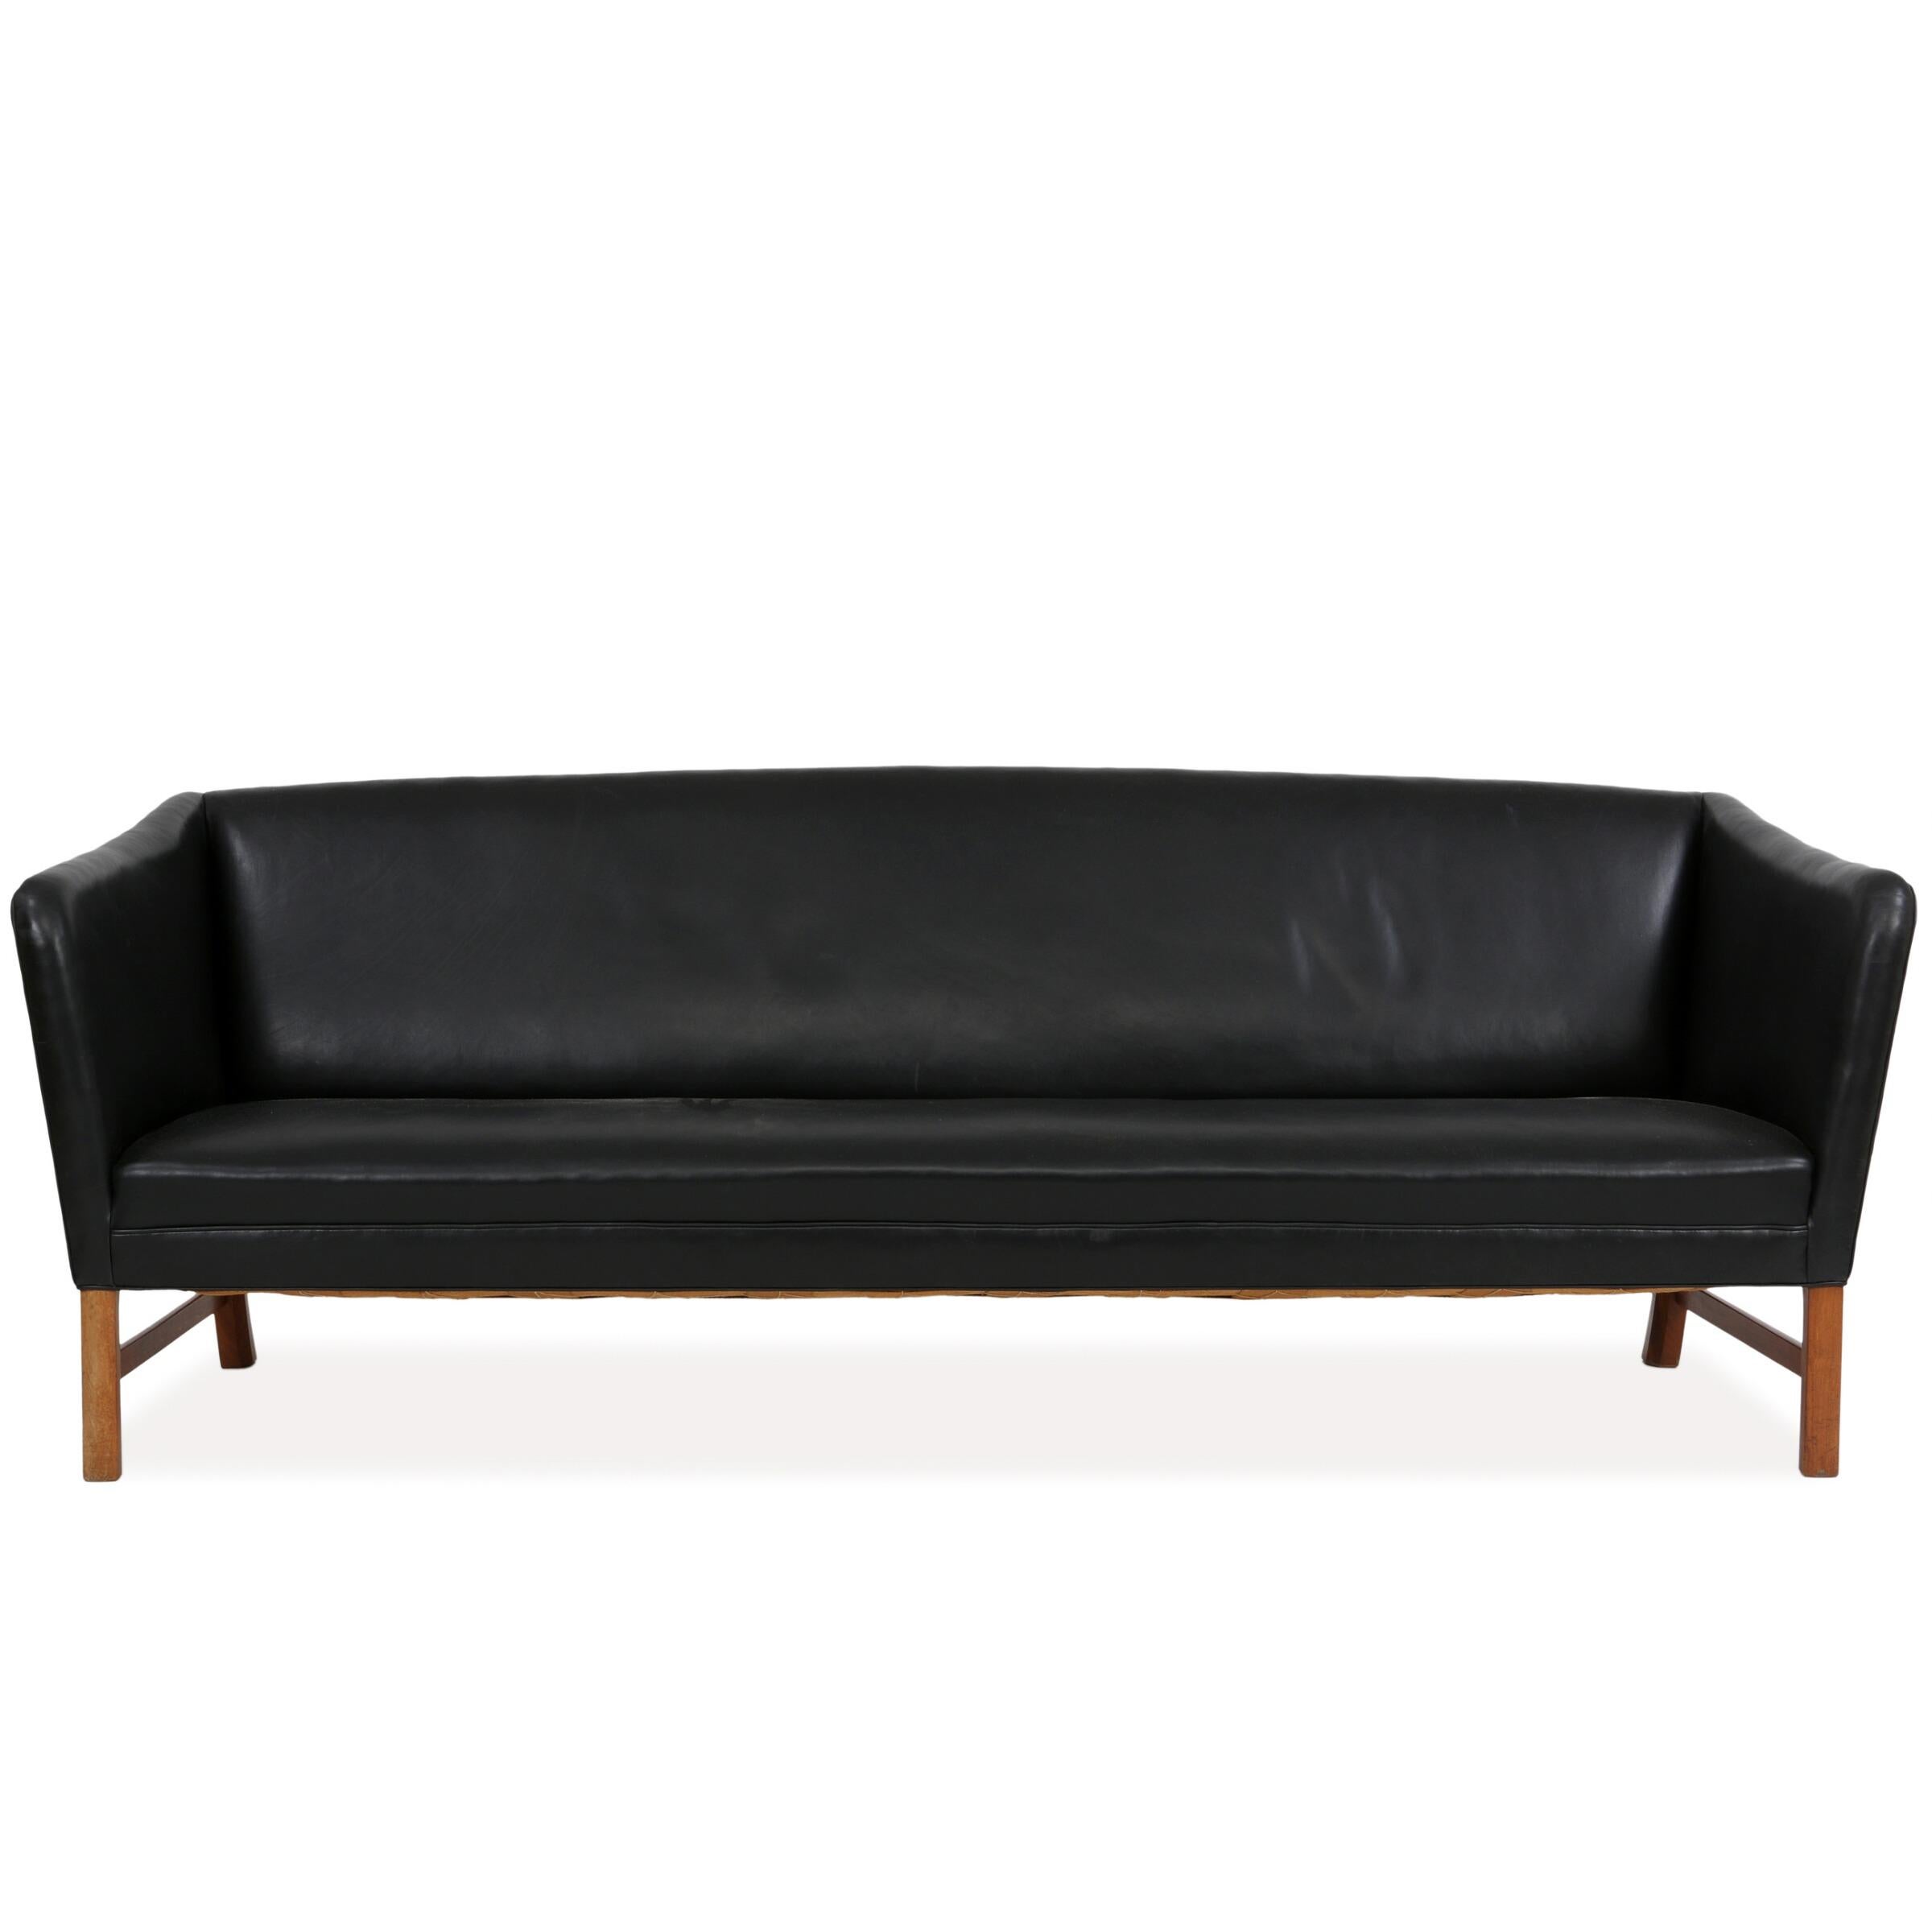 Freestanding three seater sofa with mahogany frame designed by Ole Wanscher. Sides, seat and back upholstered with black leather. This example made 1960s by cabinetmaker A.J. Iversen. Measures: H. 79 cm. L. 209 cm. Seat H. 40 cm. D. 80